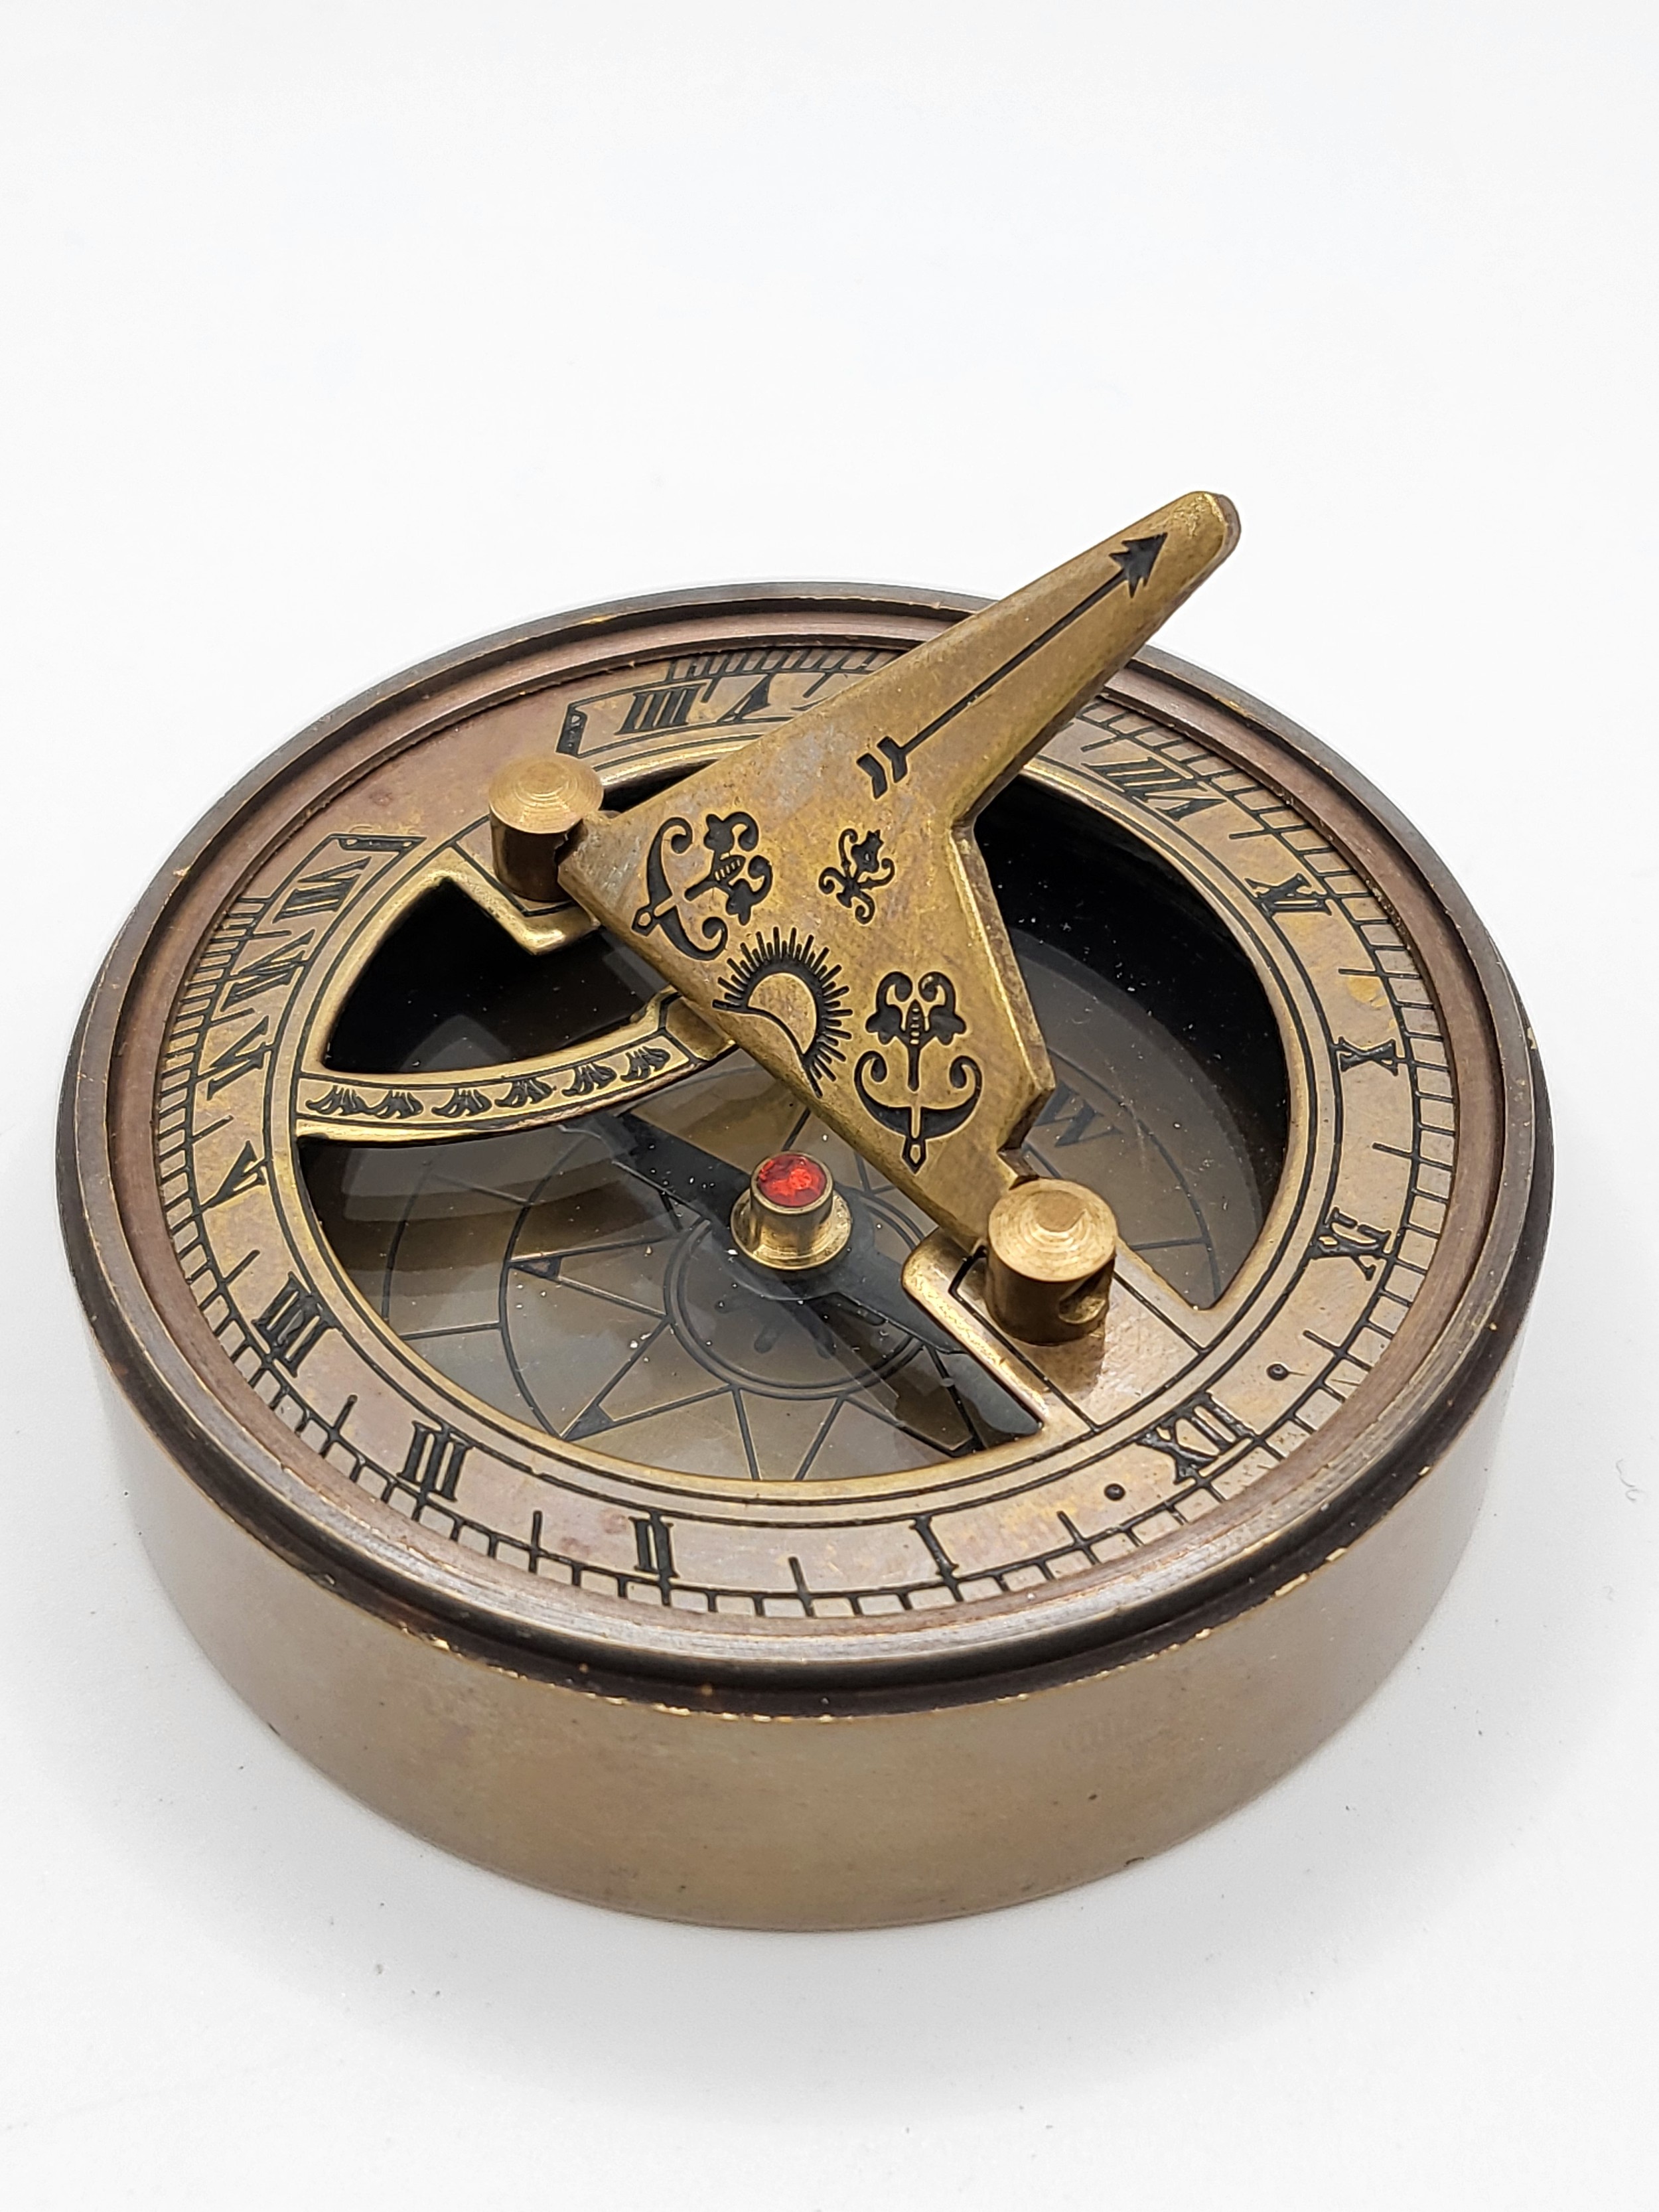 A novelty brass-cased sundial and compass.